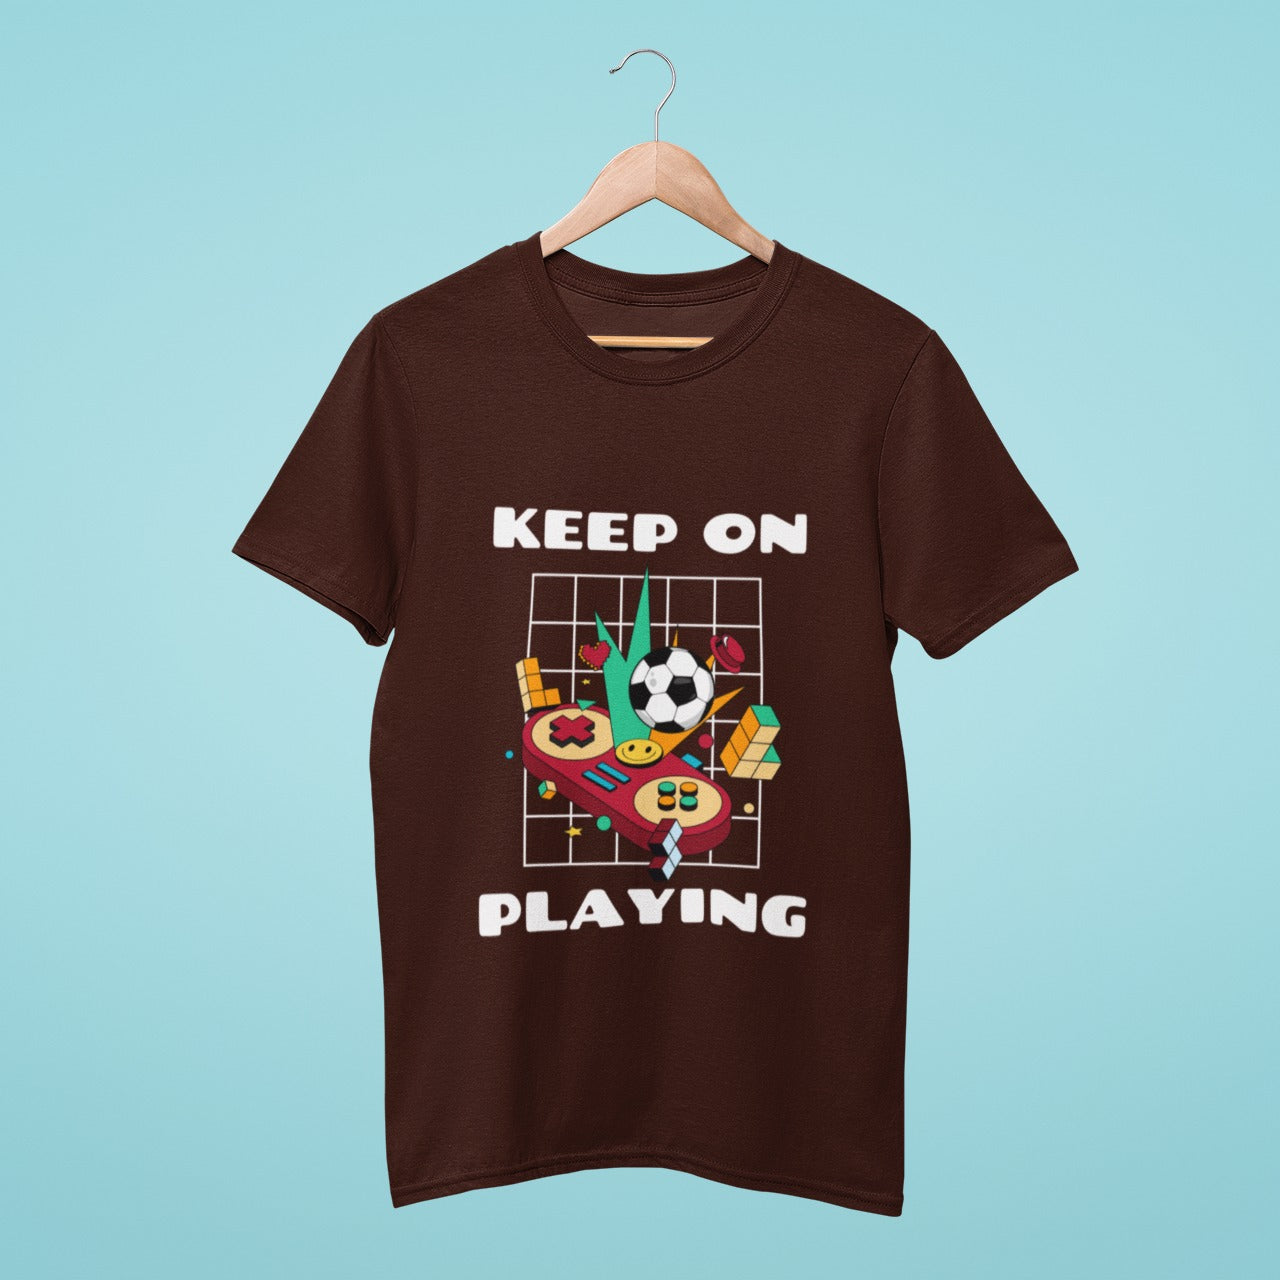 Unleash your gaming spirit with this brown t-shirt featuring a playful joystick with games around it in the centre, and a motivating "Keep on Playing" slogan. Perfect for gamers who never back down from a challenge and keep pushing for their victory.